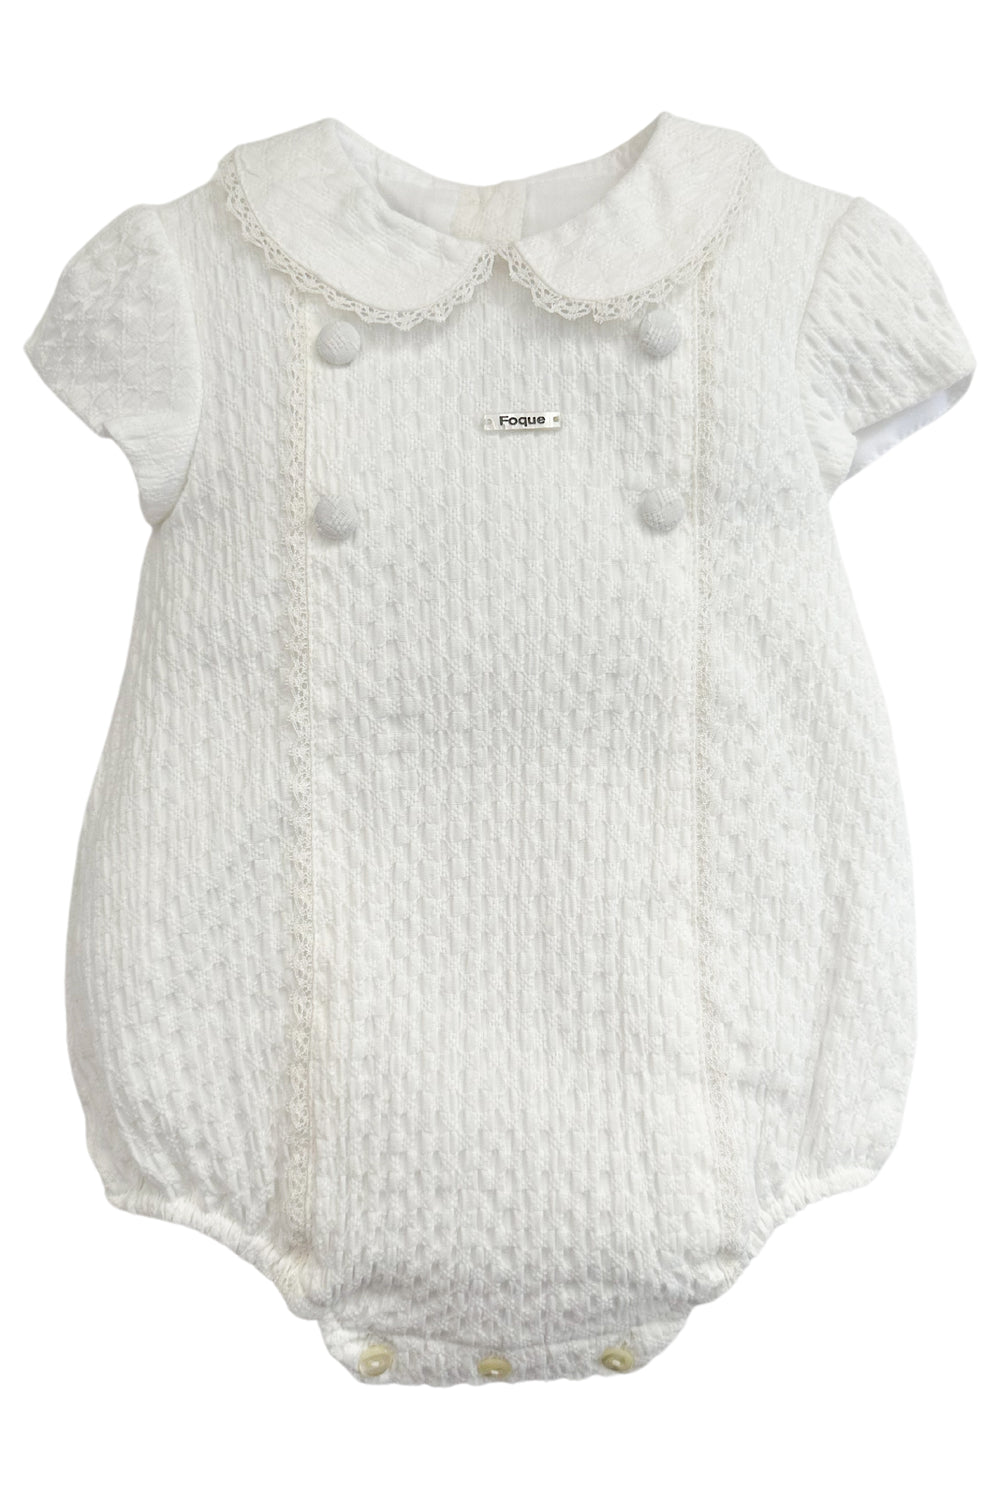 Foque "Lux" Ivory Cotton Romper | iphoneandroidapplications